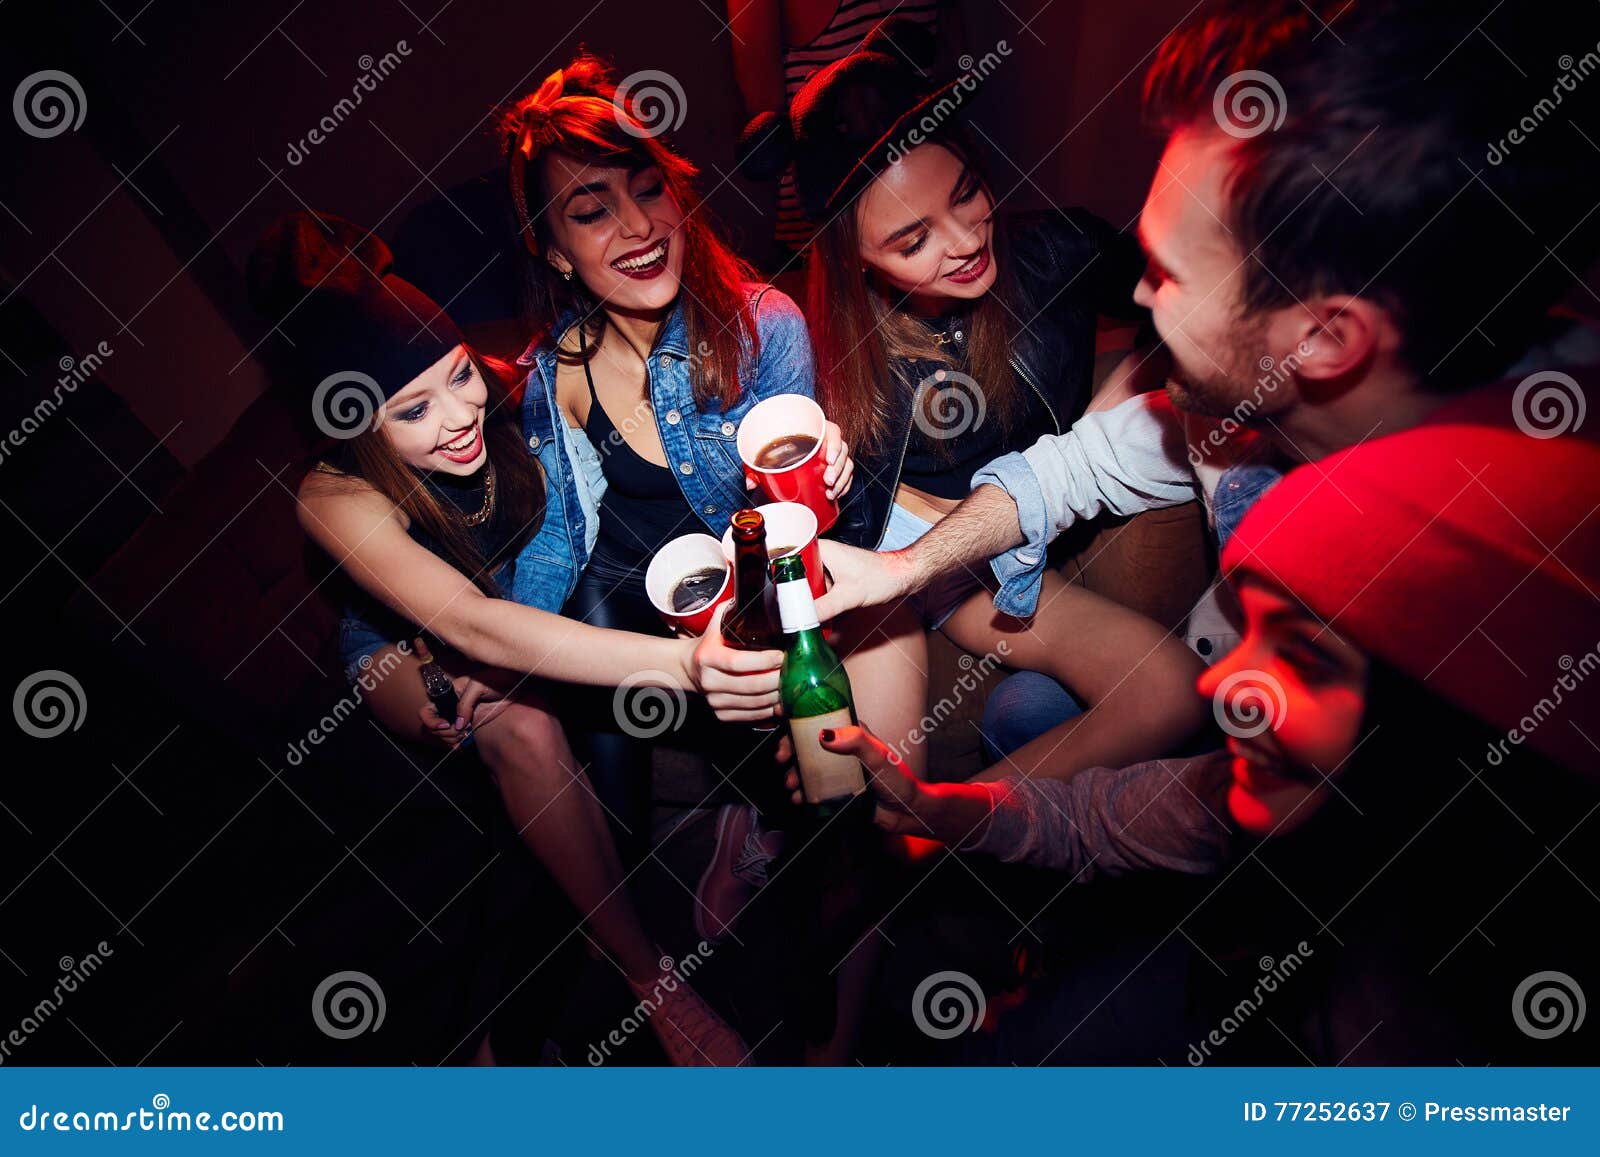 drunk teens at a party